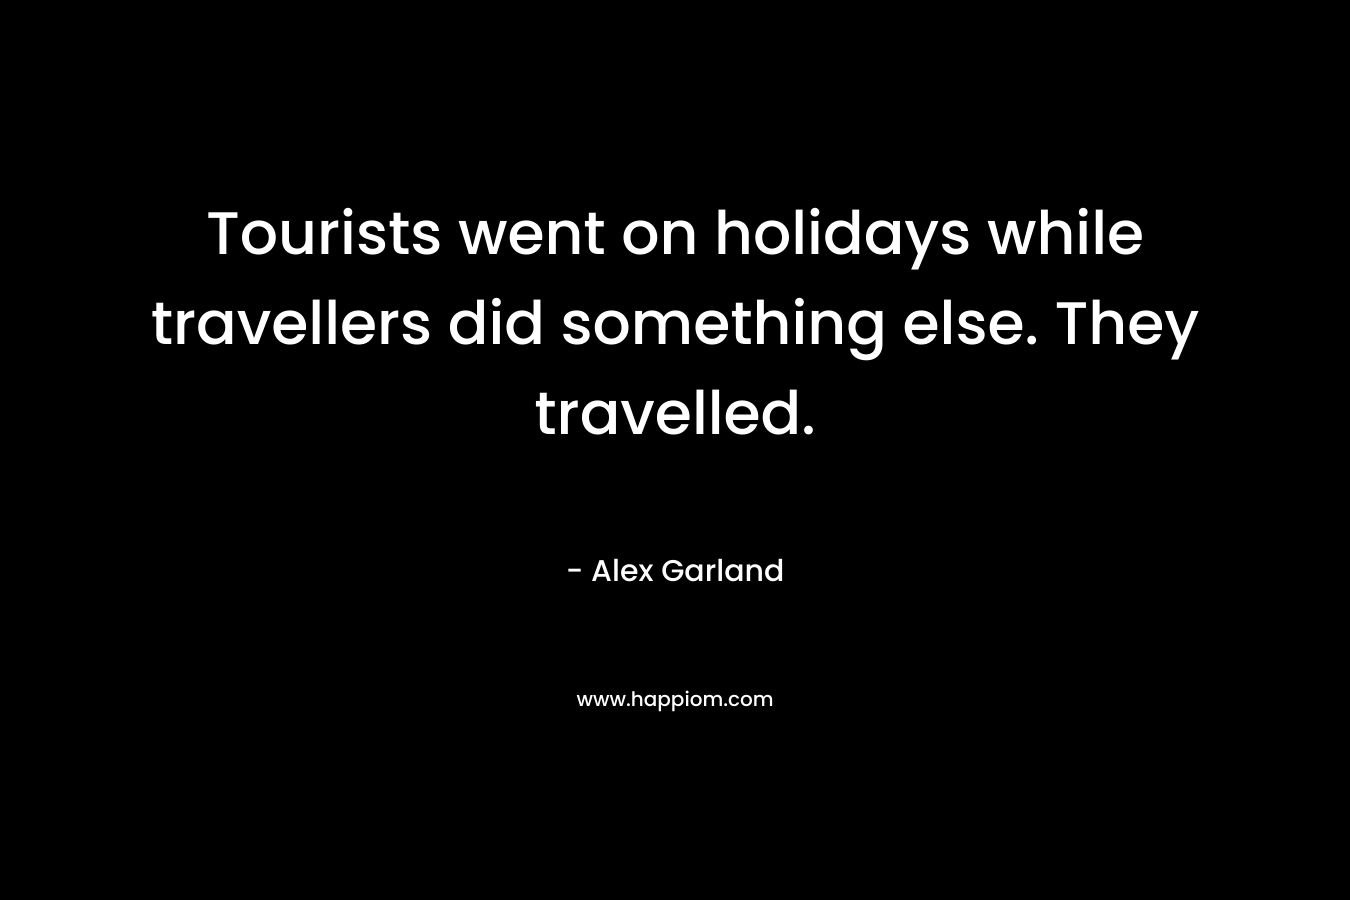 Tourists went on holidays while travellers did something else. They travelled.